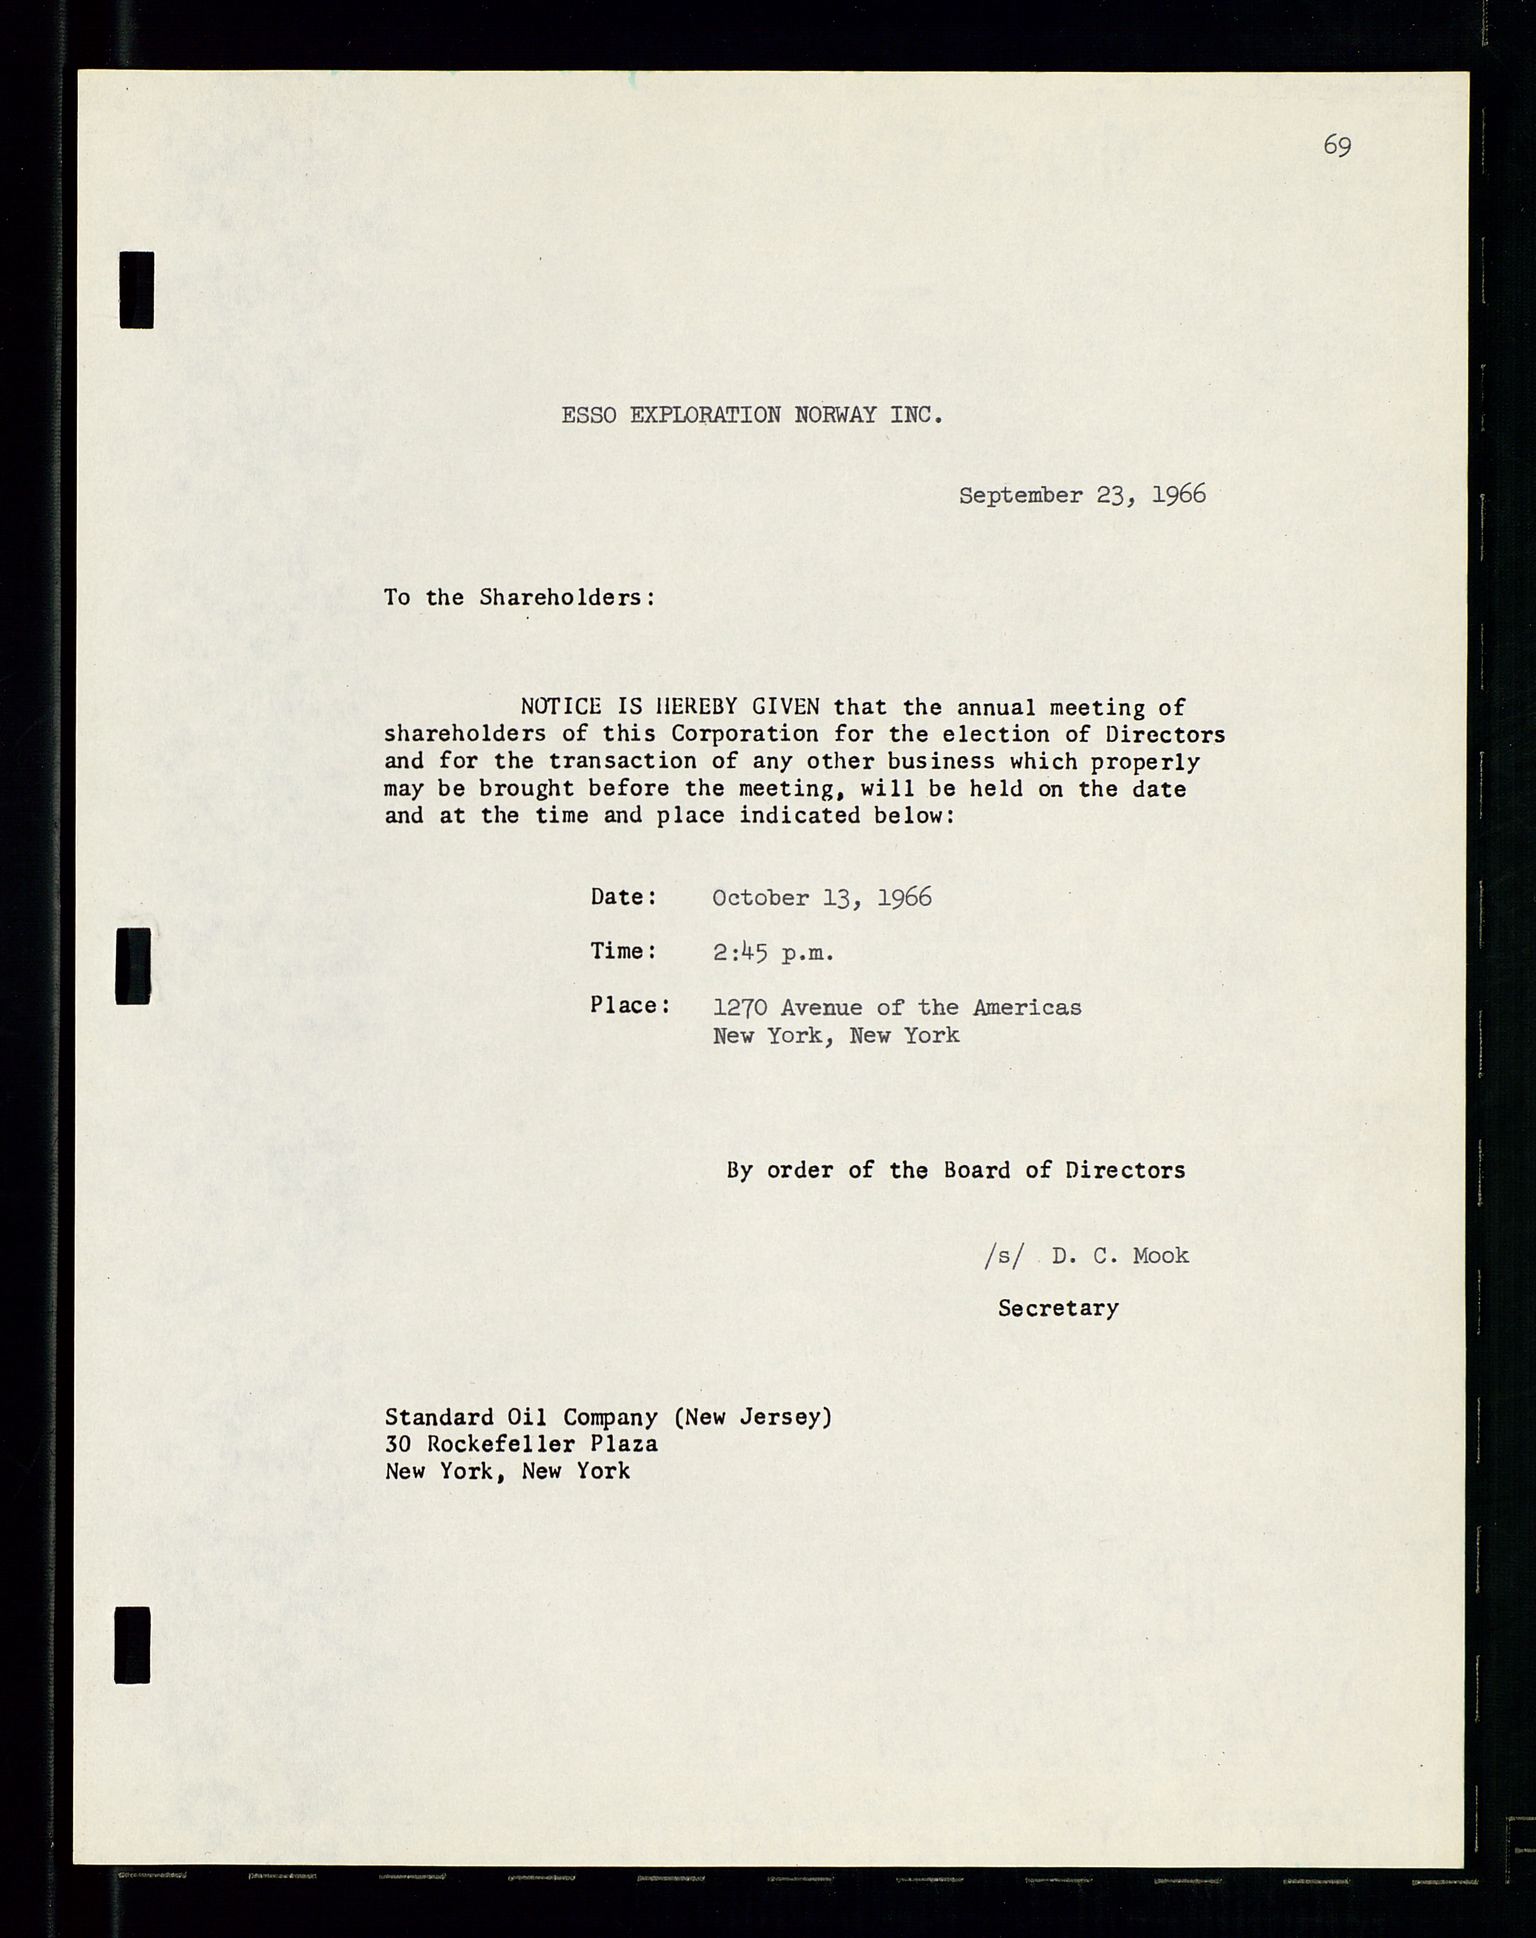 Pa 1512 - Esso Exploration and Production Norway Inc., SAST/A-101917/A/Aa/L0001/0001: Styredokumenter / Corporate records, By-Laws, Board meeting minutes, Incorporations, 1965-1975, s. 69